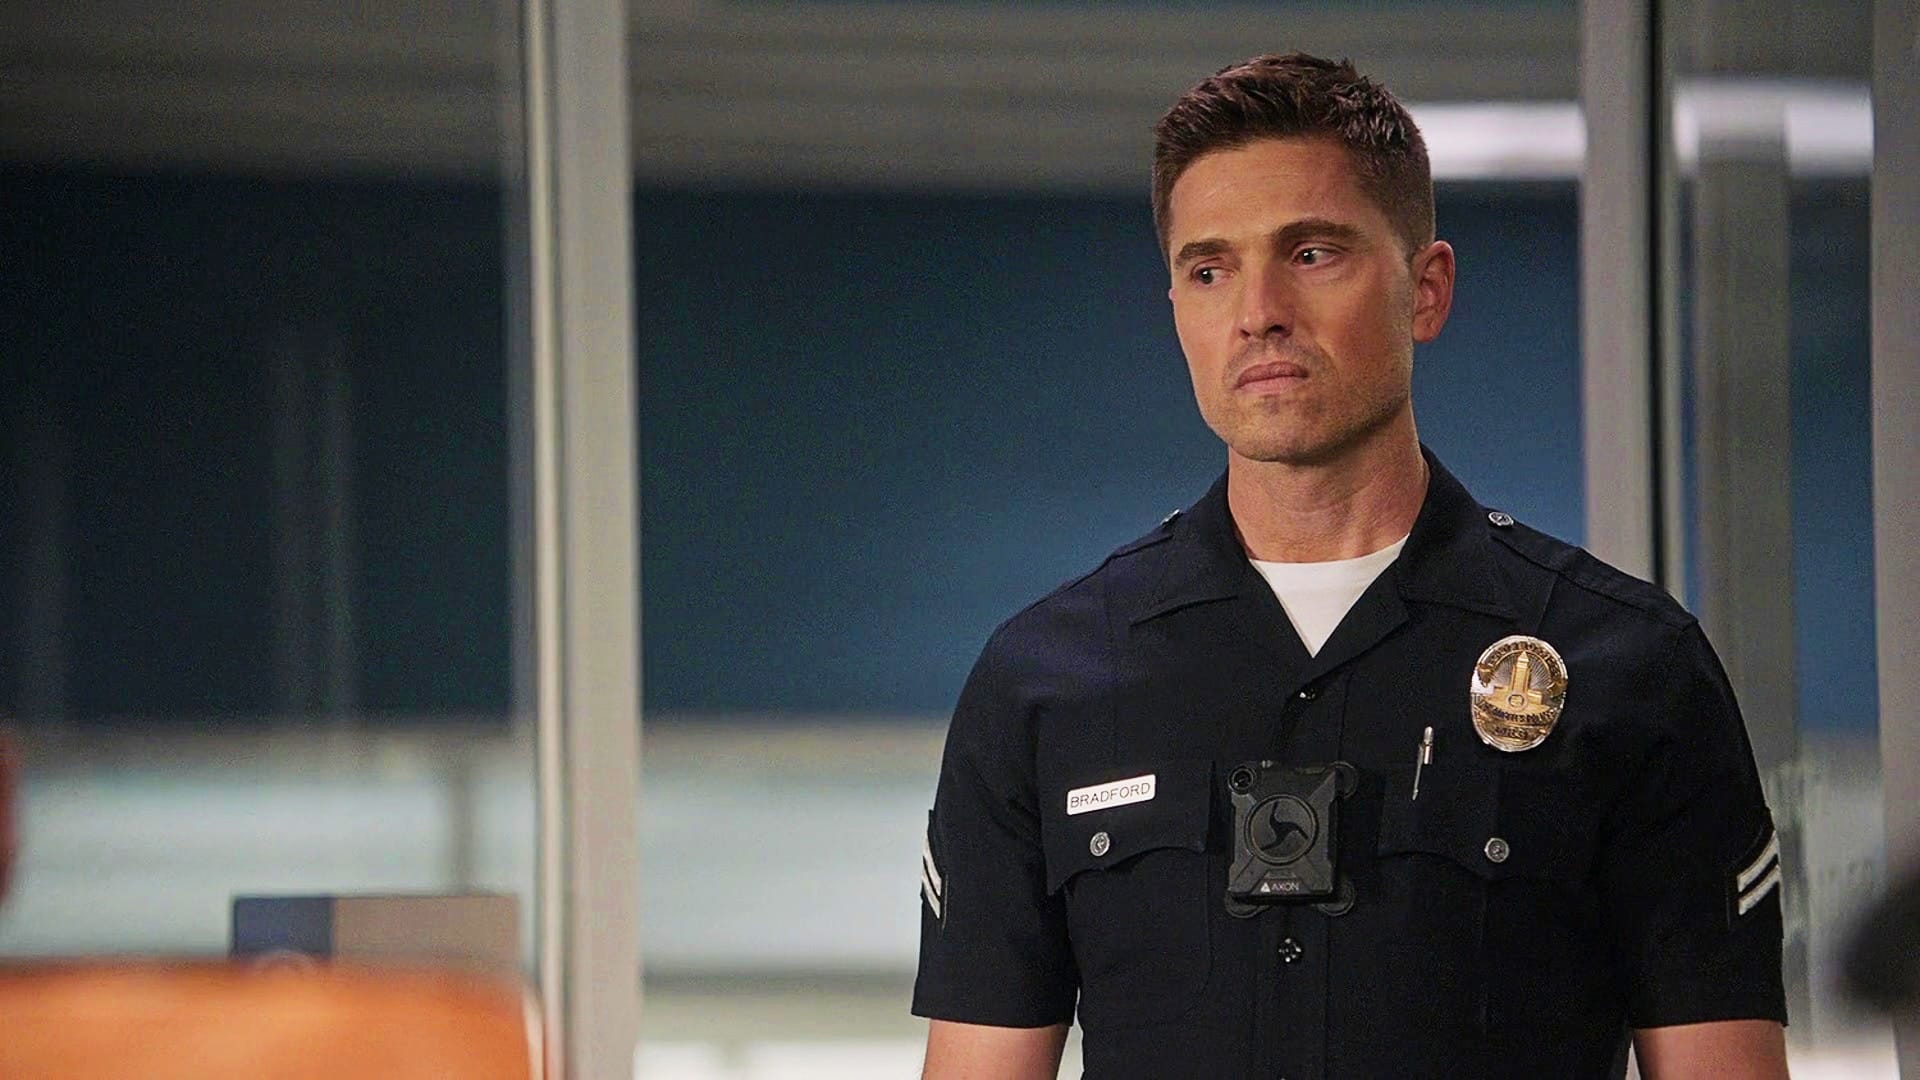 The Rookie Season 6 Release Date, Watch Online, Preview, Cast, and More - Eric Winter